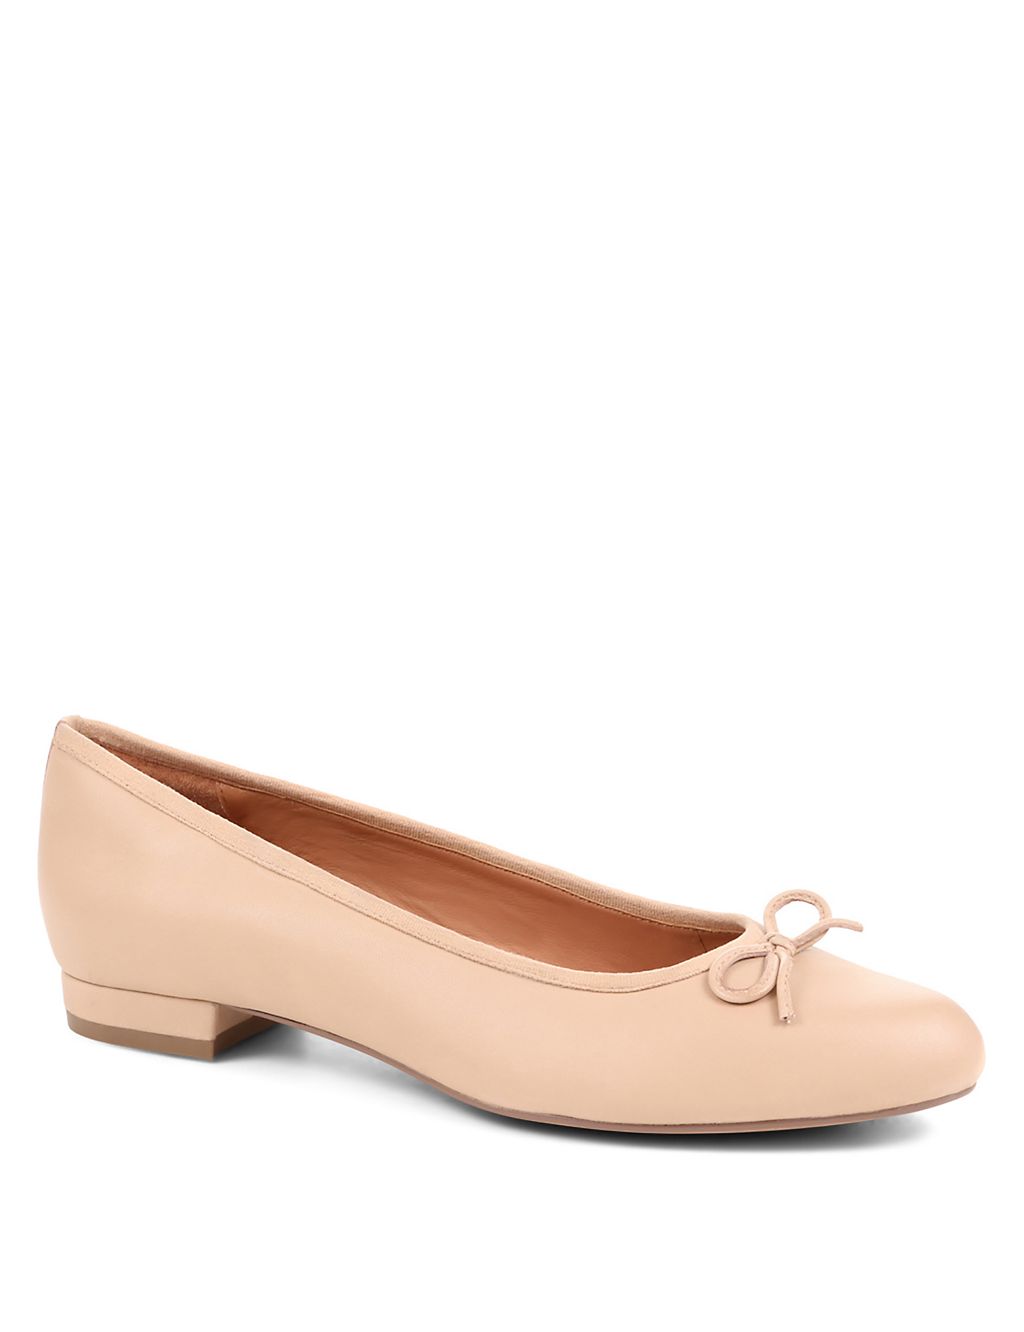 Leather Flat Ballet Pumps 1 of 7